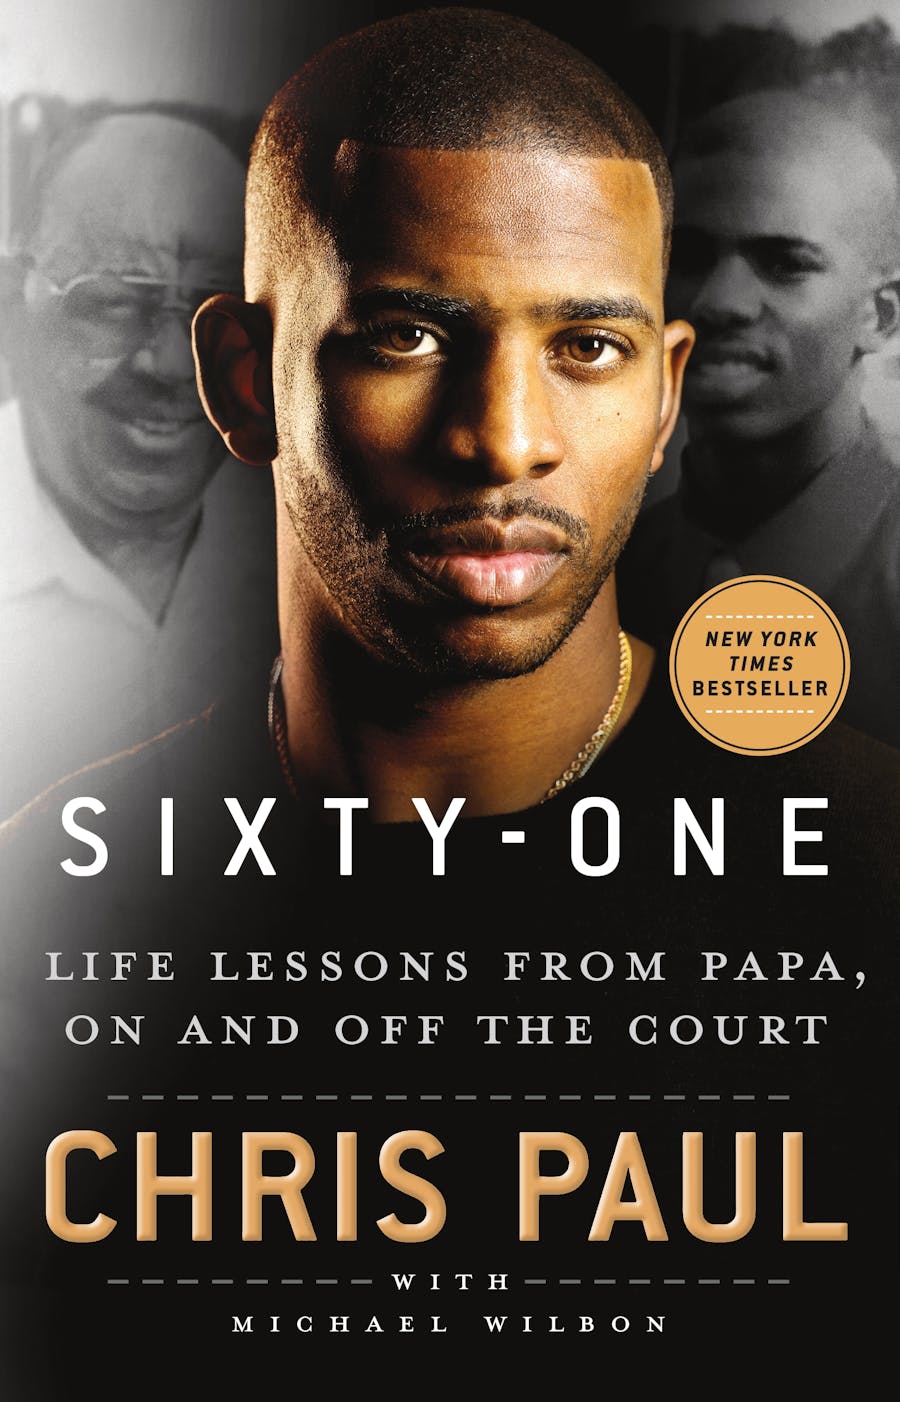 Sixty-One by Chris Paul with Michael Wilbon